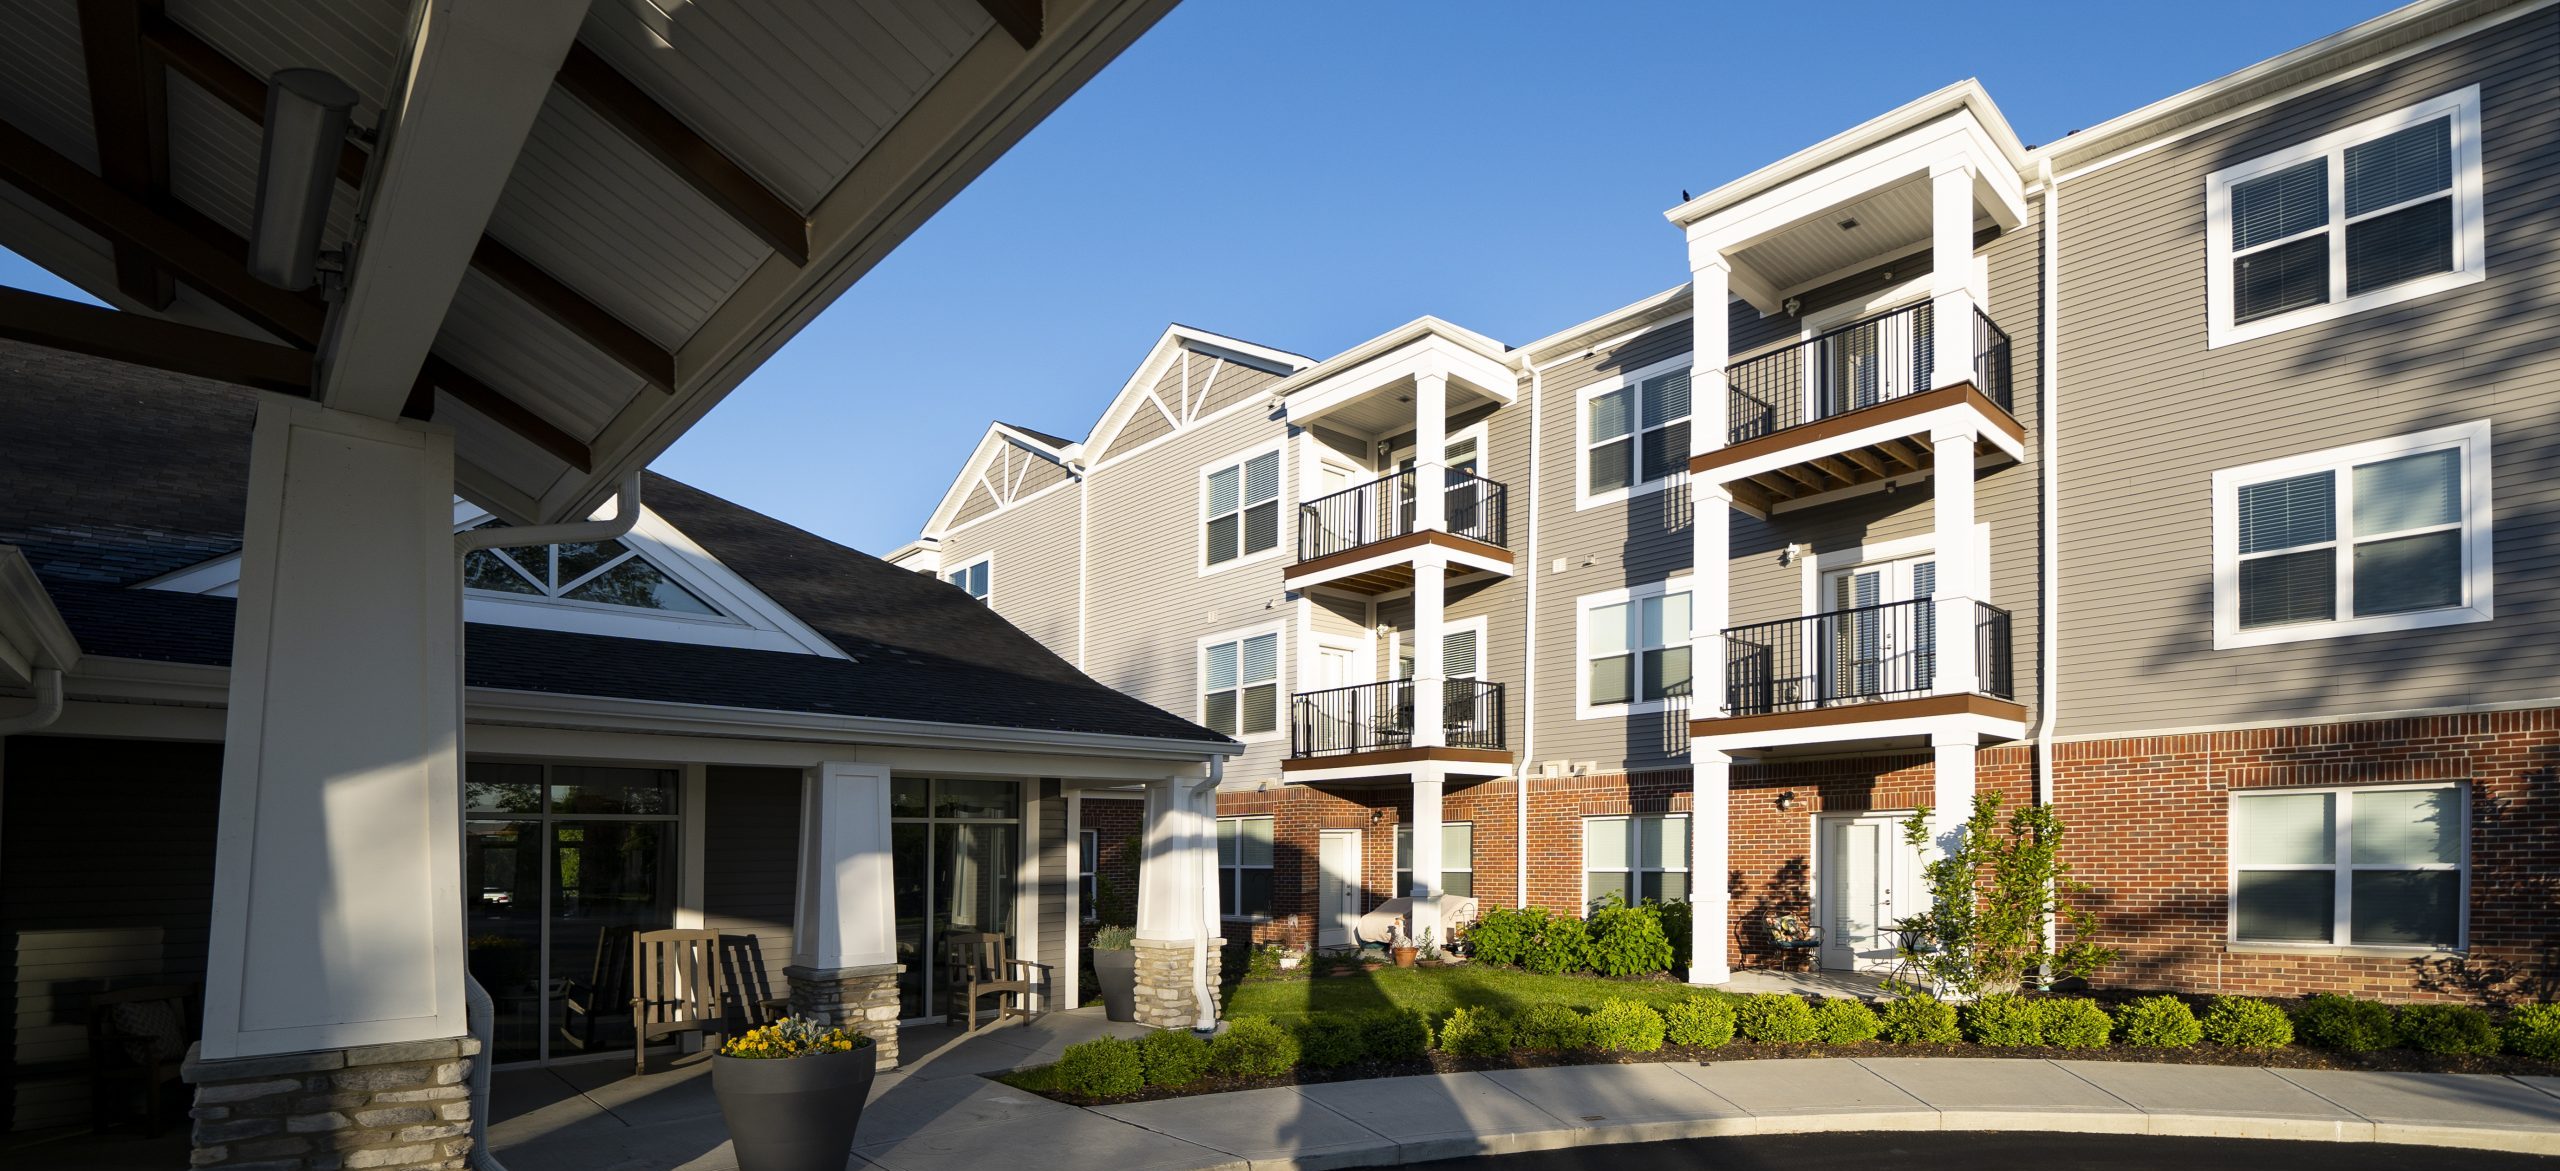 Photo of exterior of legacy village